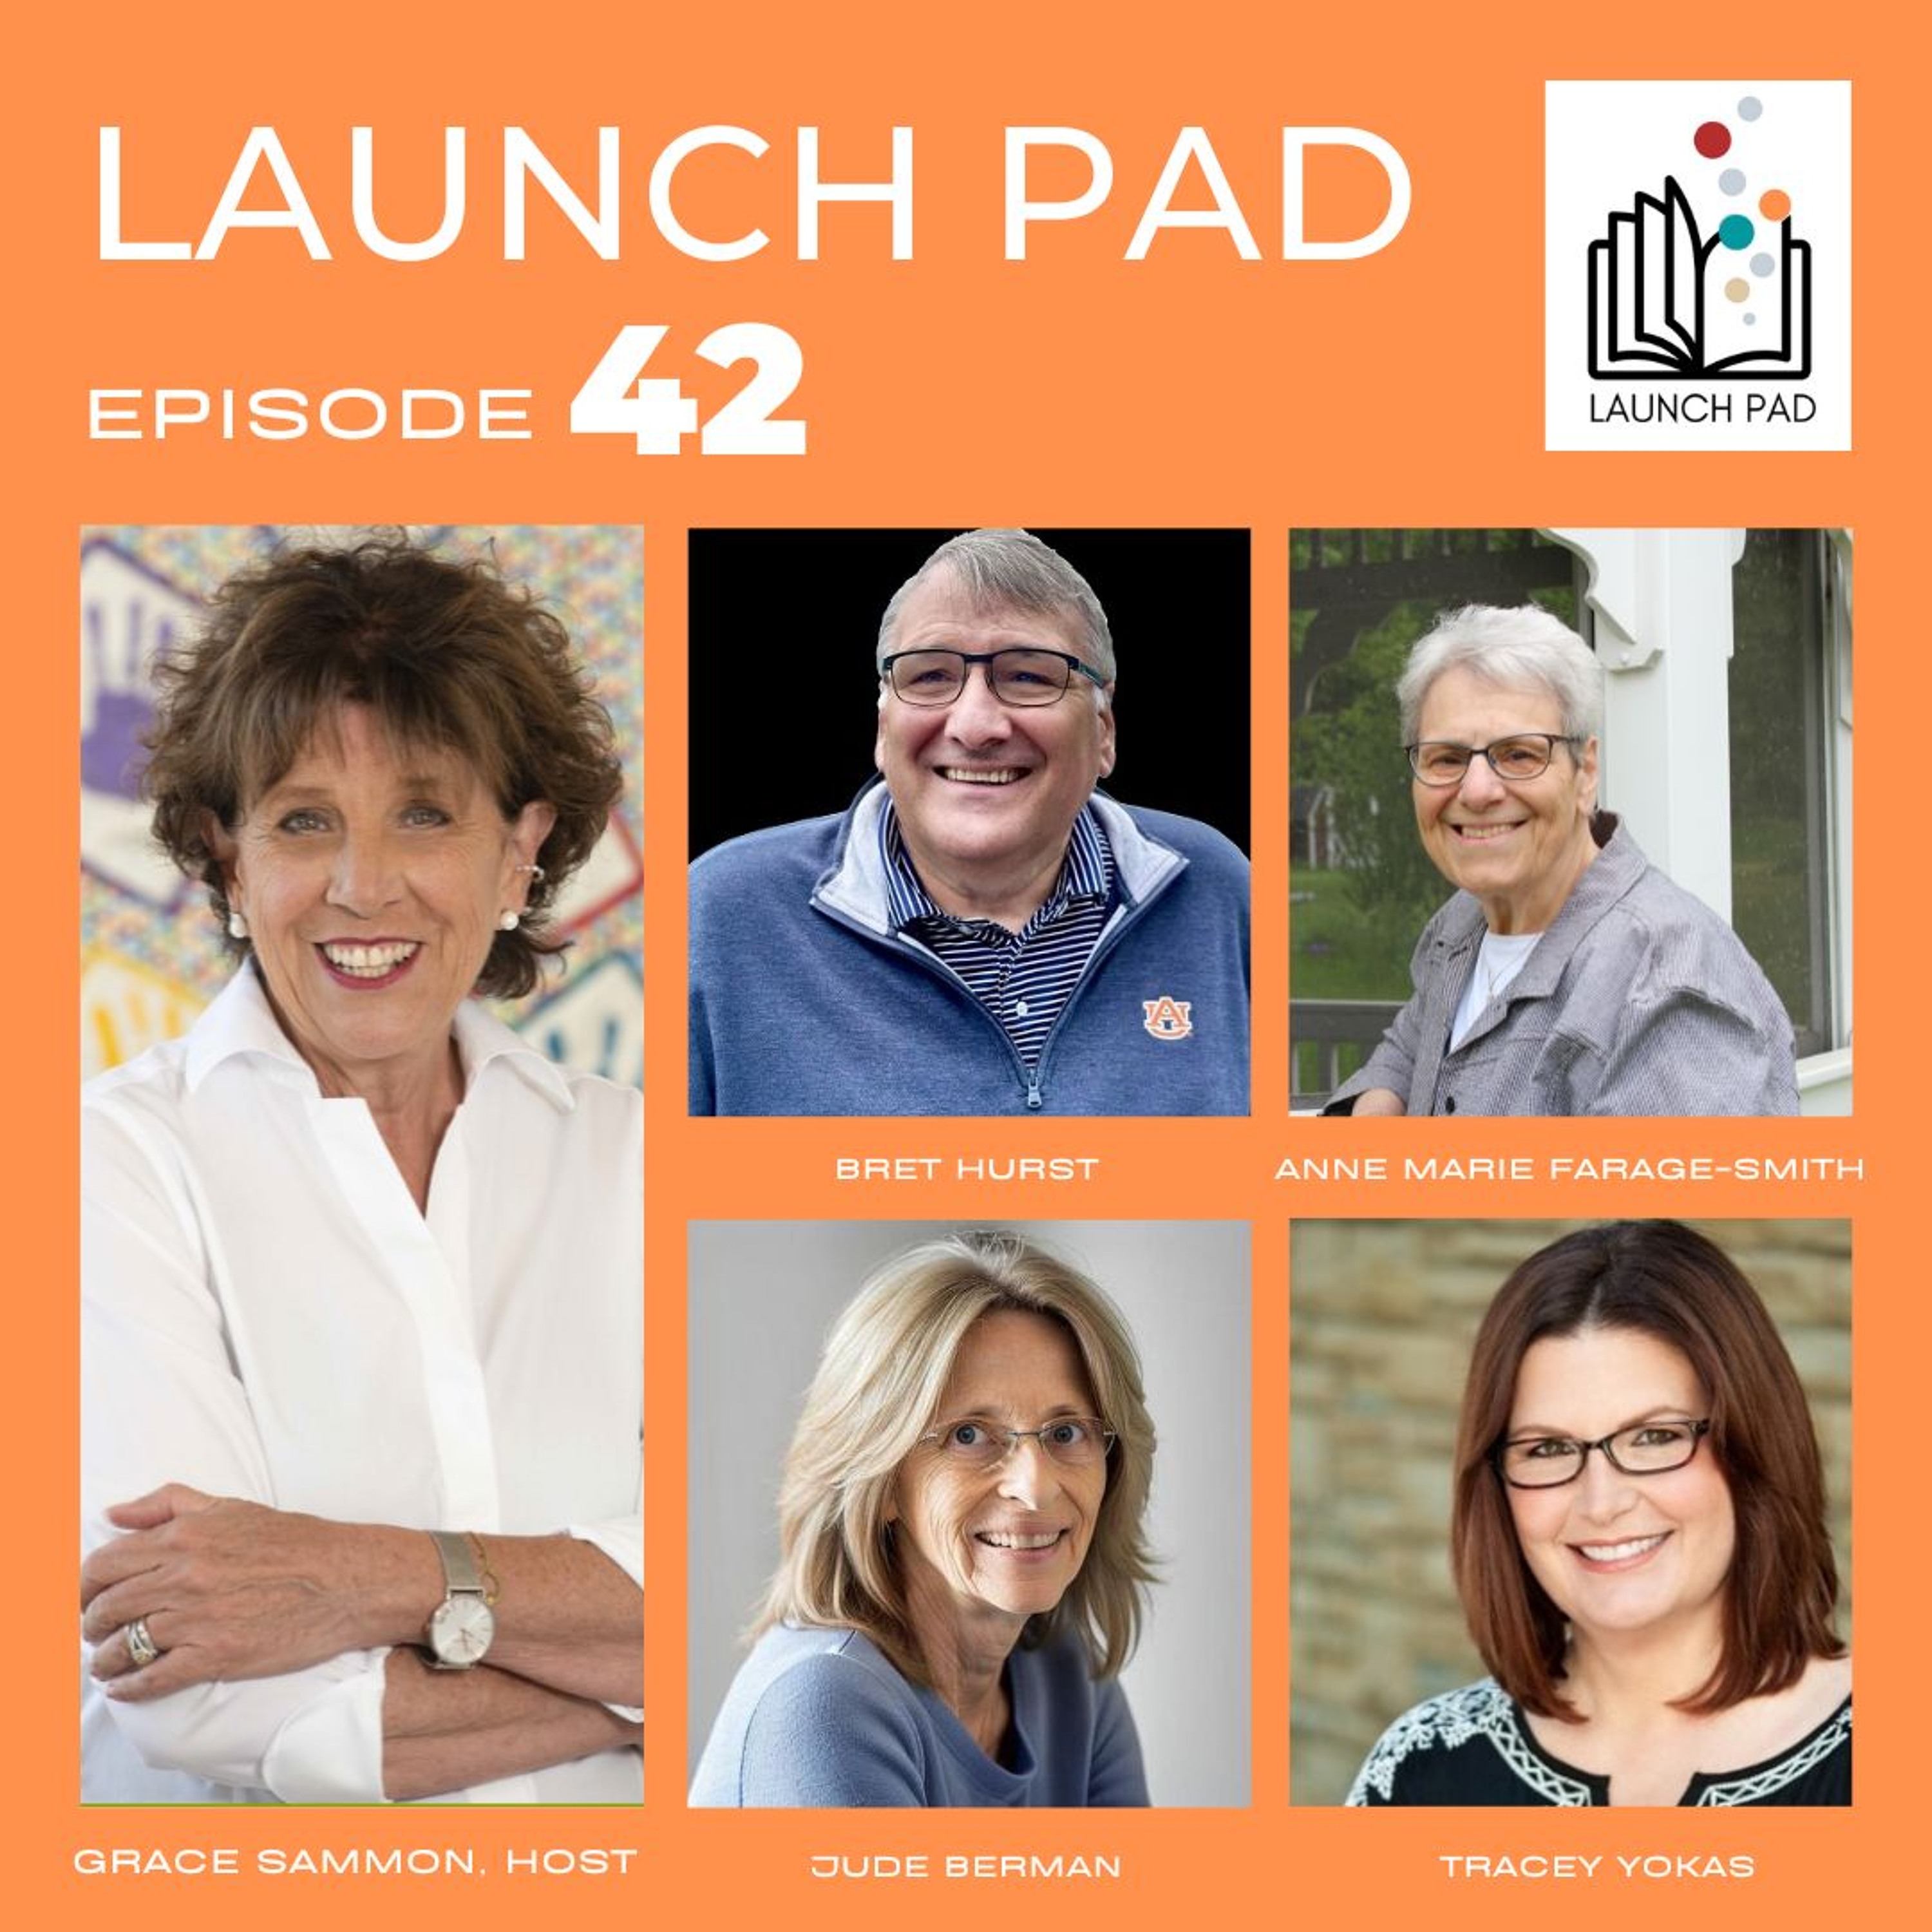 EPISODE 42 with Jude Berman, Anne Marie Farage-Smith, Bret Hurst, and Tracey Yokas